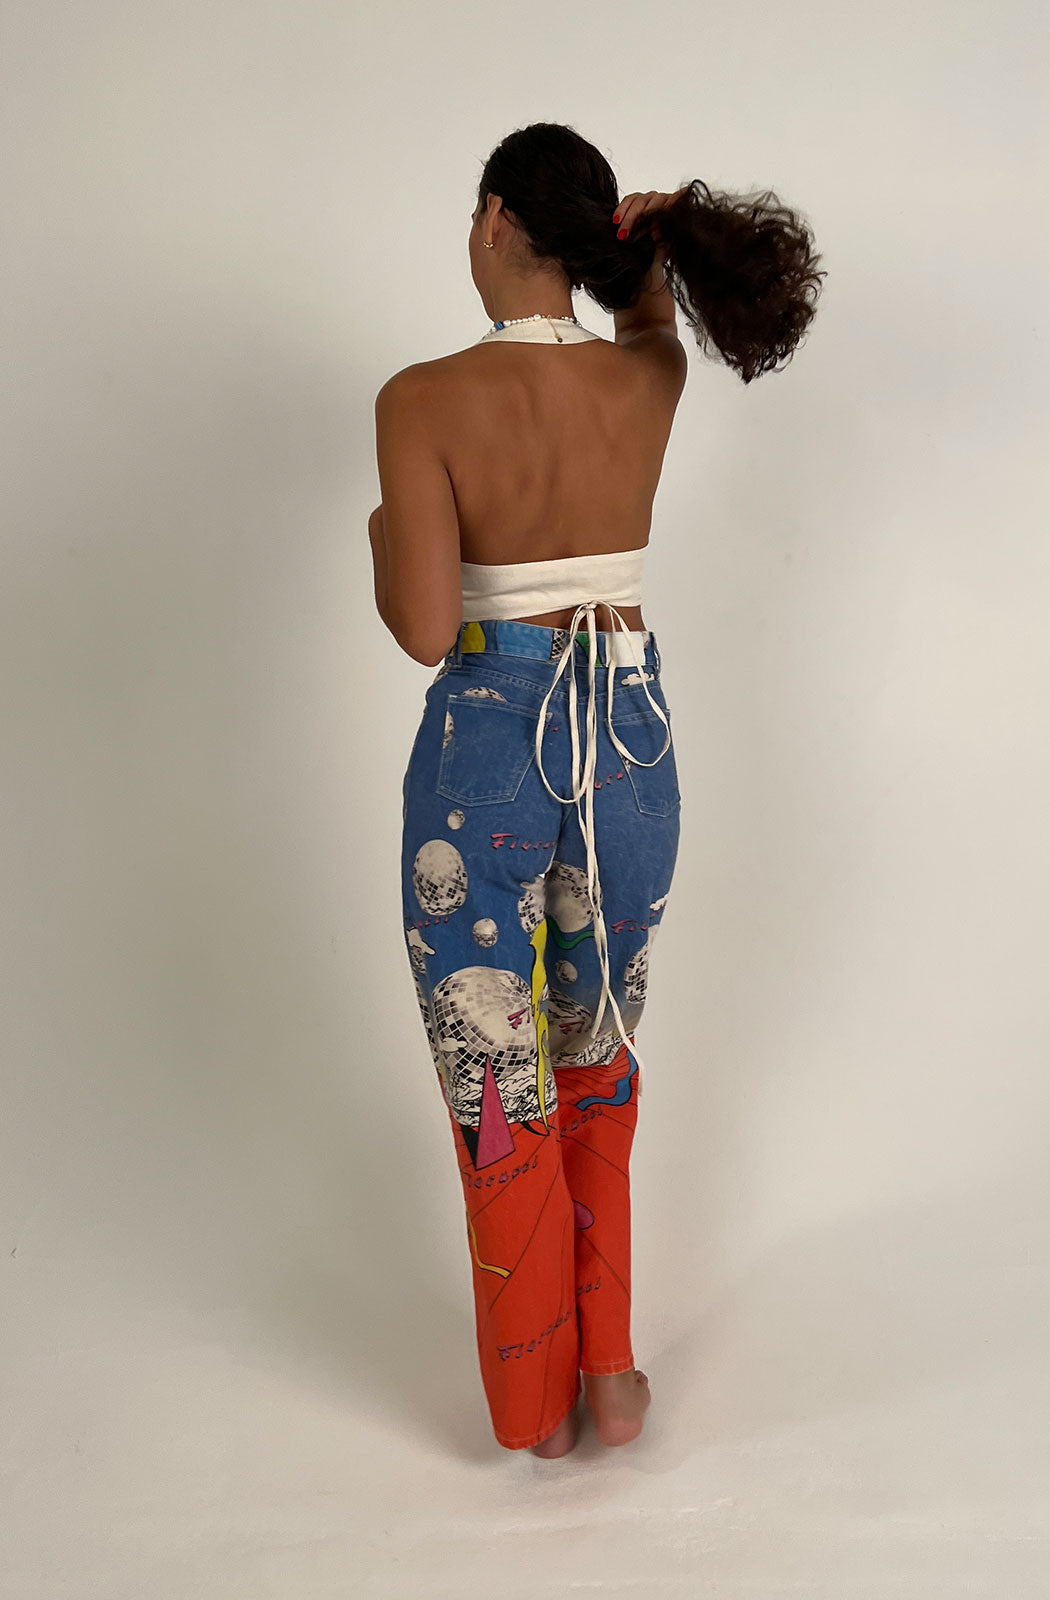 Women's Discoteca Jeans in the all-over multi-coloured discoteca print from the archive. The graphic jeans are high-waisted with a straight leg fit, iconic 5-pocket design, waistband with belt loop and a button and zip fly. Made from hand-crafted, incredibly flattering premium denim. Model back view